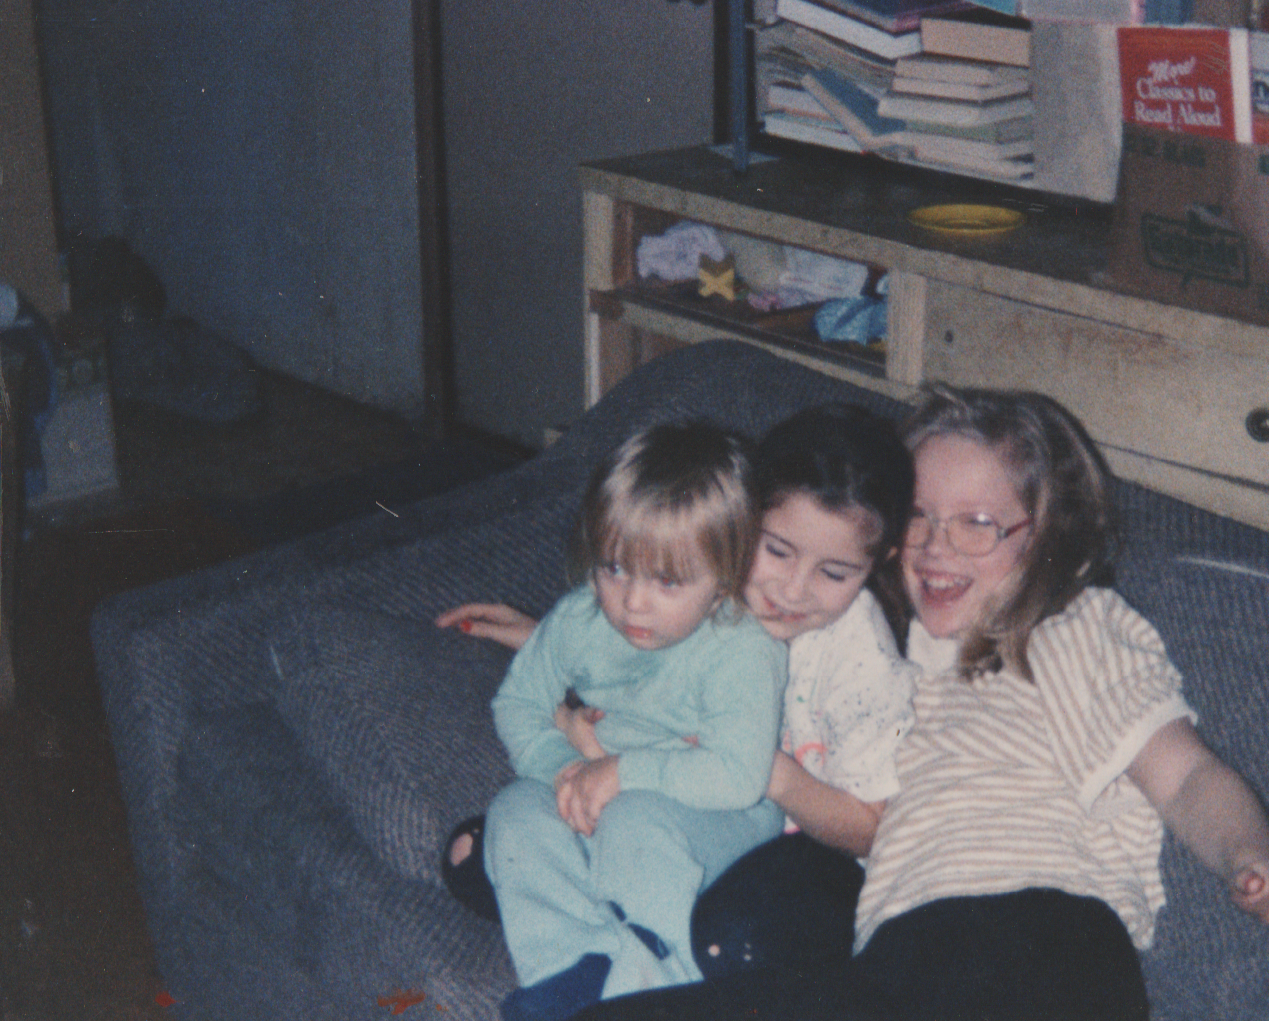 1991-12-31 - Crystal, Katrina, Katie, in the 163 living room on a gray couch by the yellow tan dresser.png